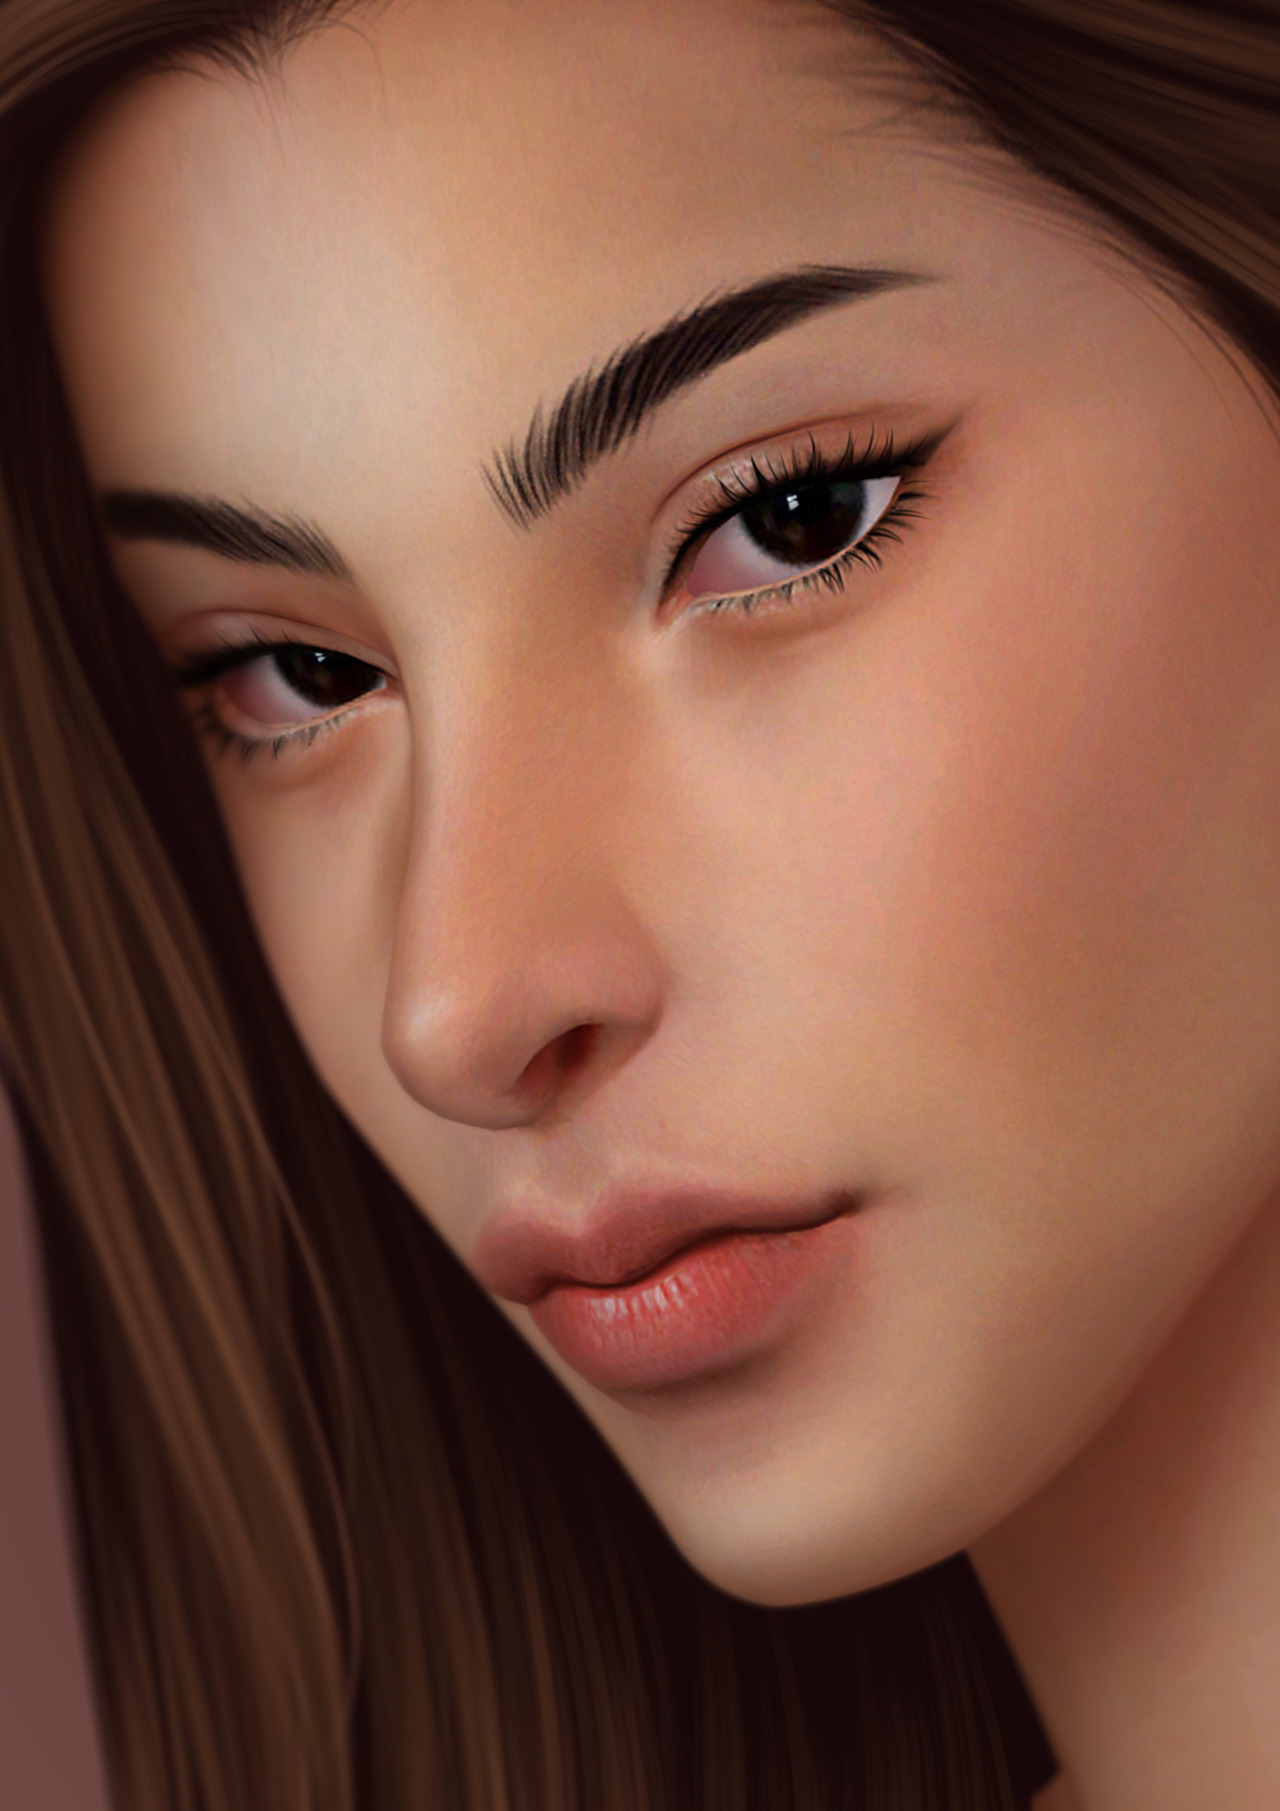 Gpme Gold F Eyebrows G Home Goppolsme Sims The Sims Skin Hot Sex